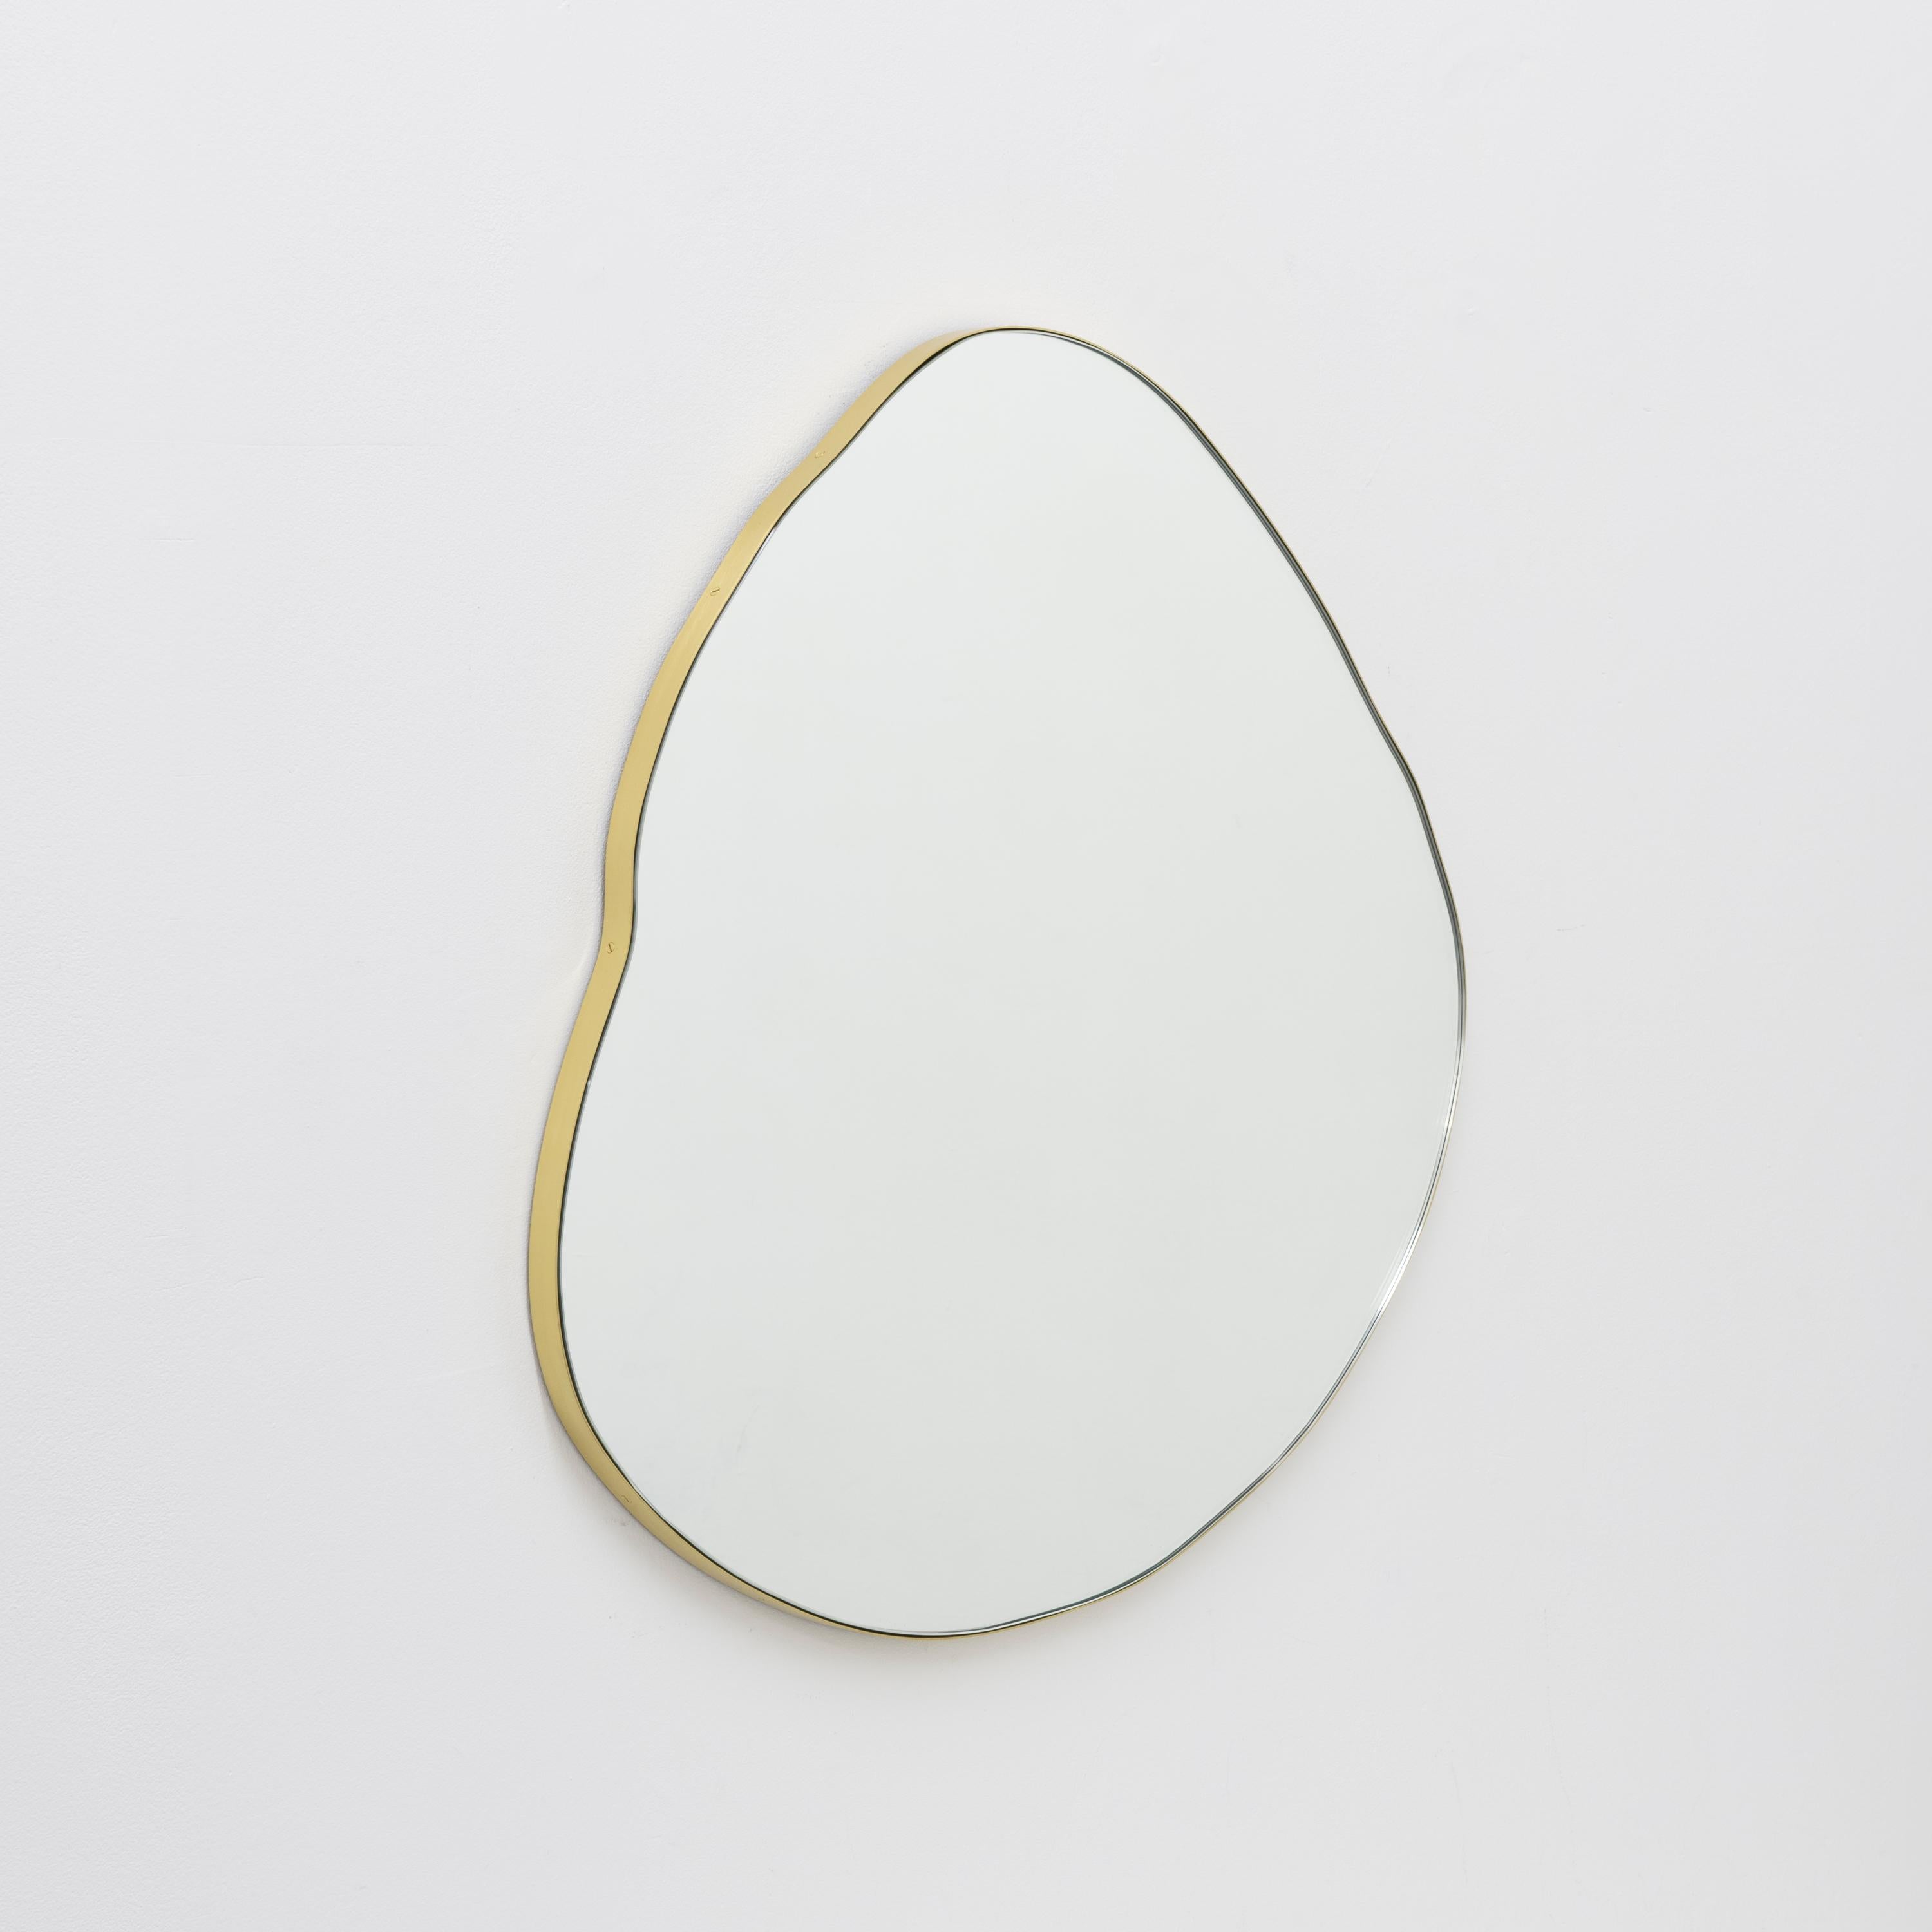 Playful and modern Ergon™ organic shaped mirror with a solid brushed brass frame. Designed and made in London, UK.

Our mirrors are designed with an integrated French cleat (split batten) system that ensures the mirror is securely mounted flush with